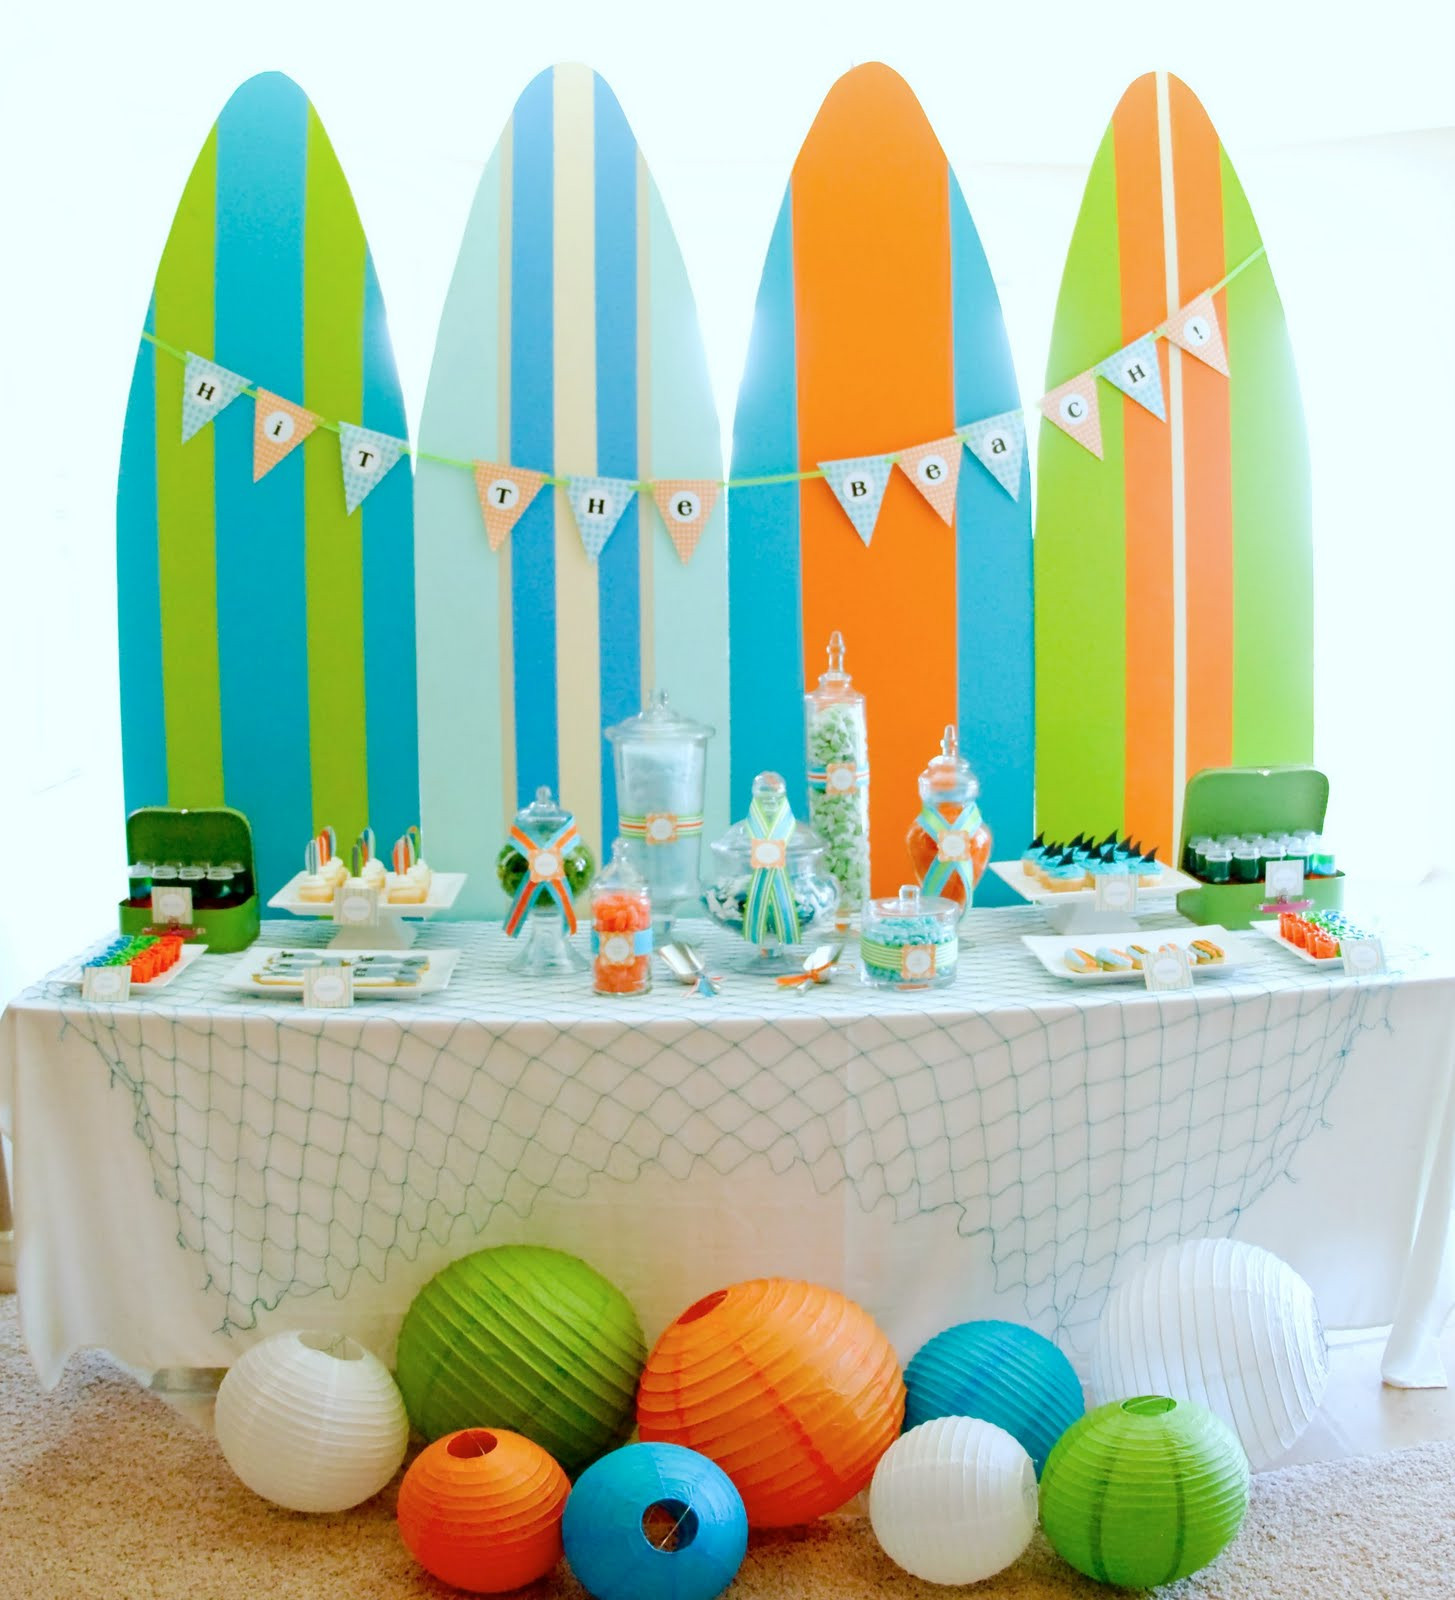 Beach Bday Party Ideas
 Kara s Party Ideas Surf s Up Summer Pool Party